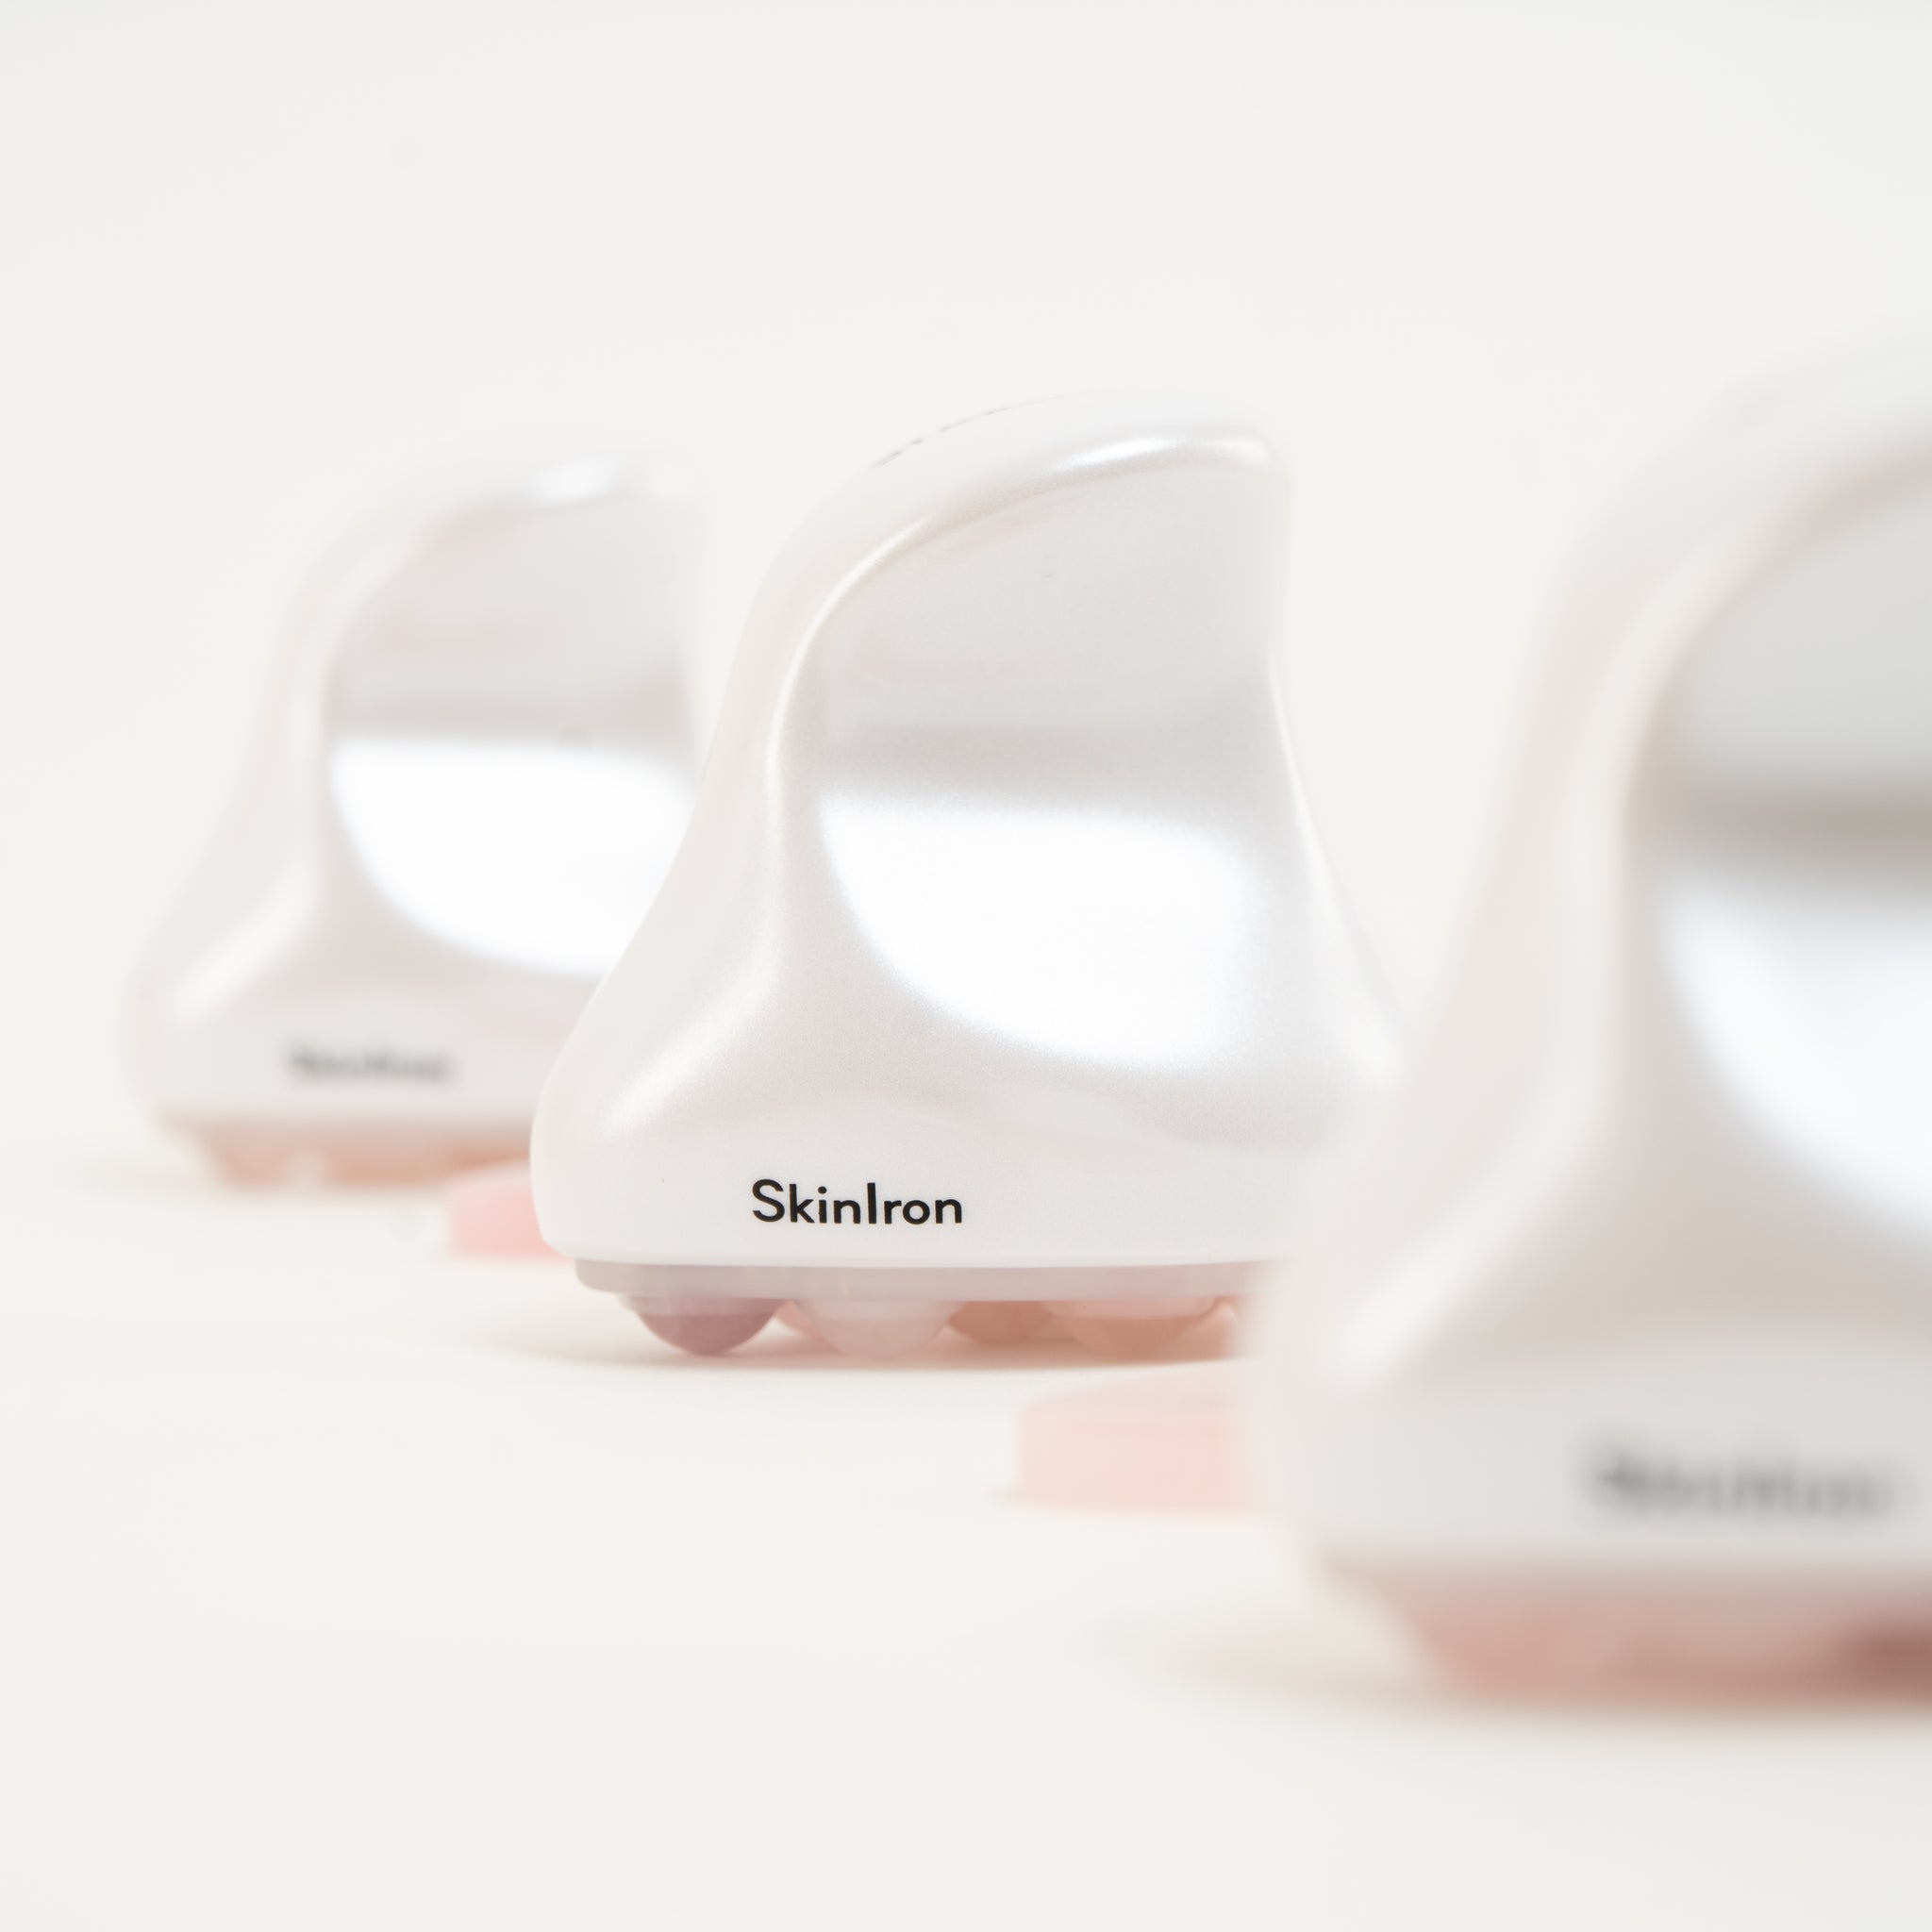 Skiniron product showcase in lifestyle picture